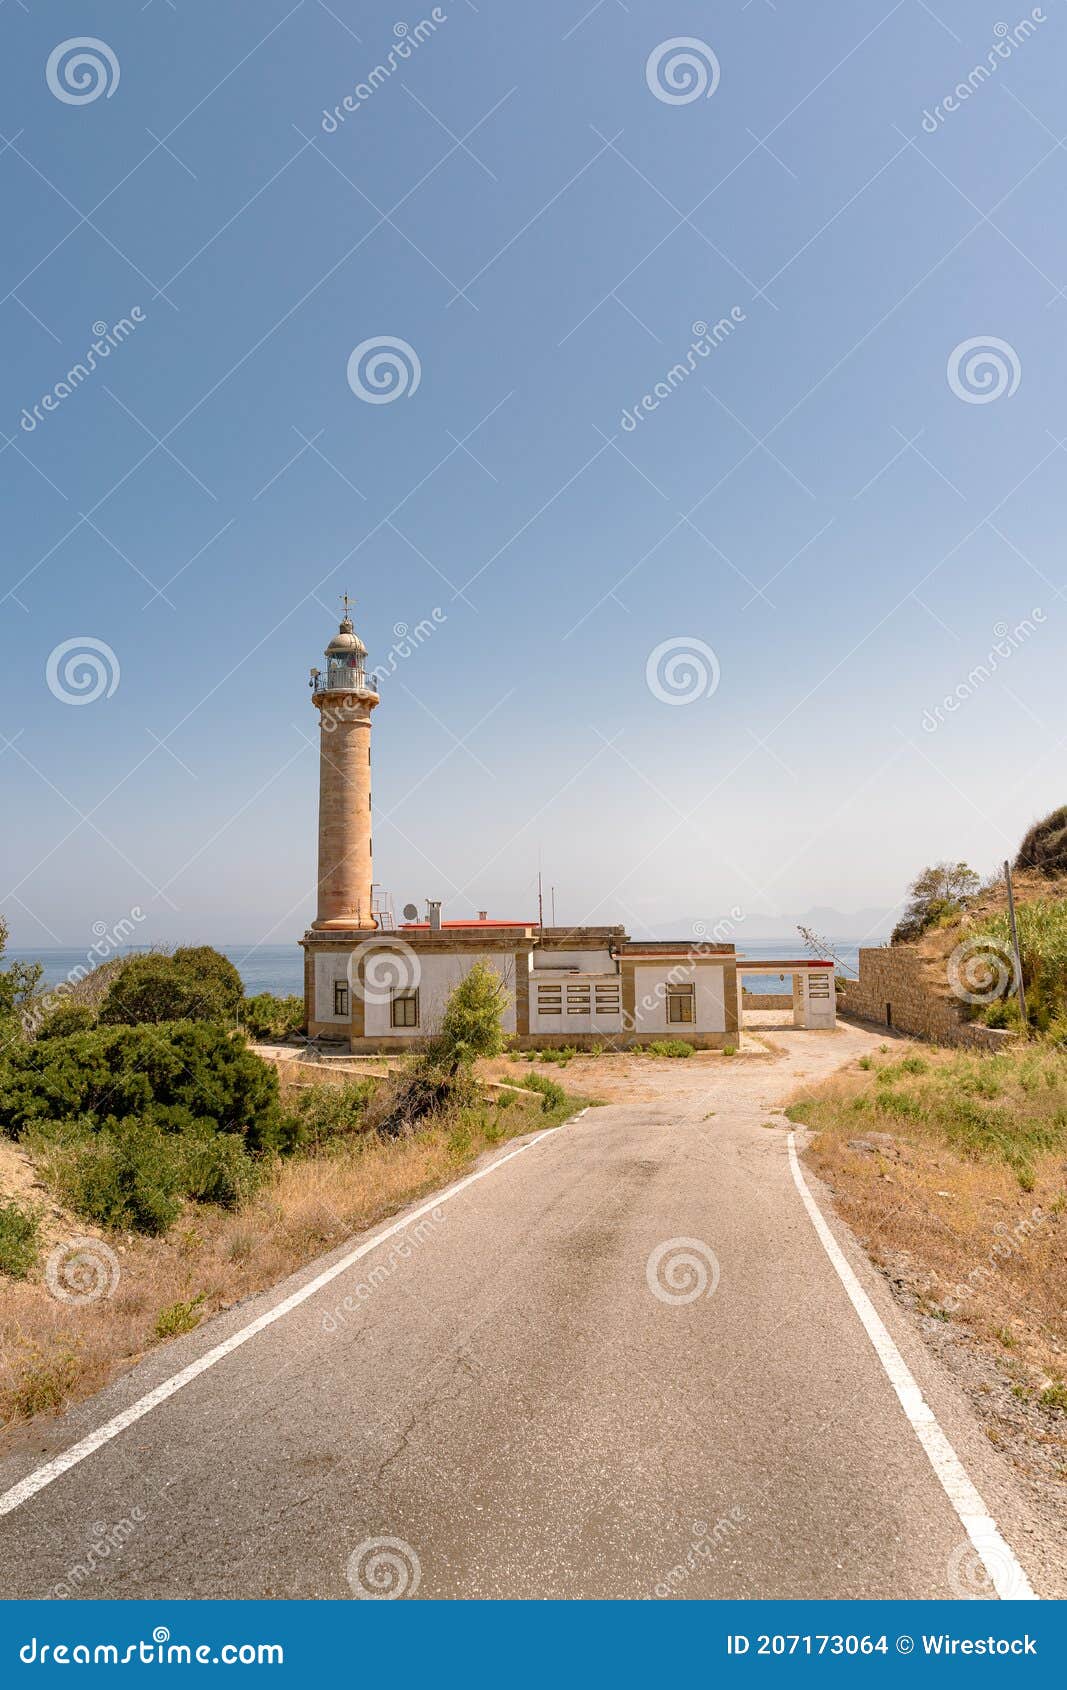 vertical shot of the faro punta carnero lighthouse near a road in spain